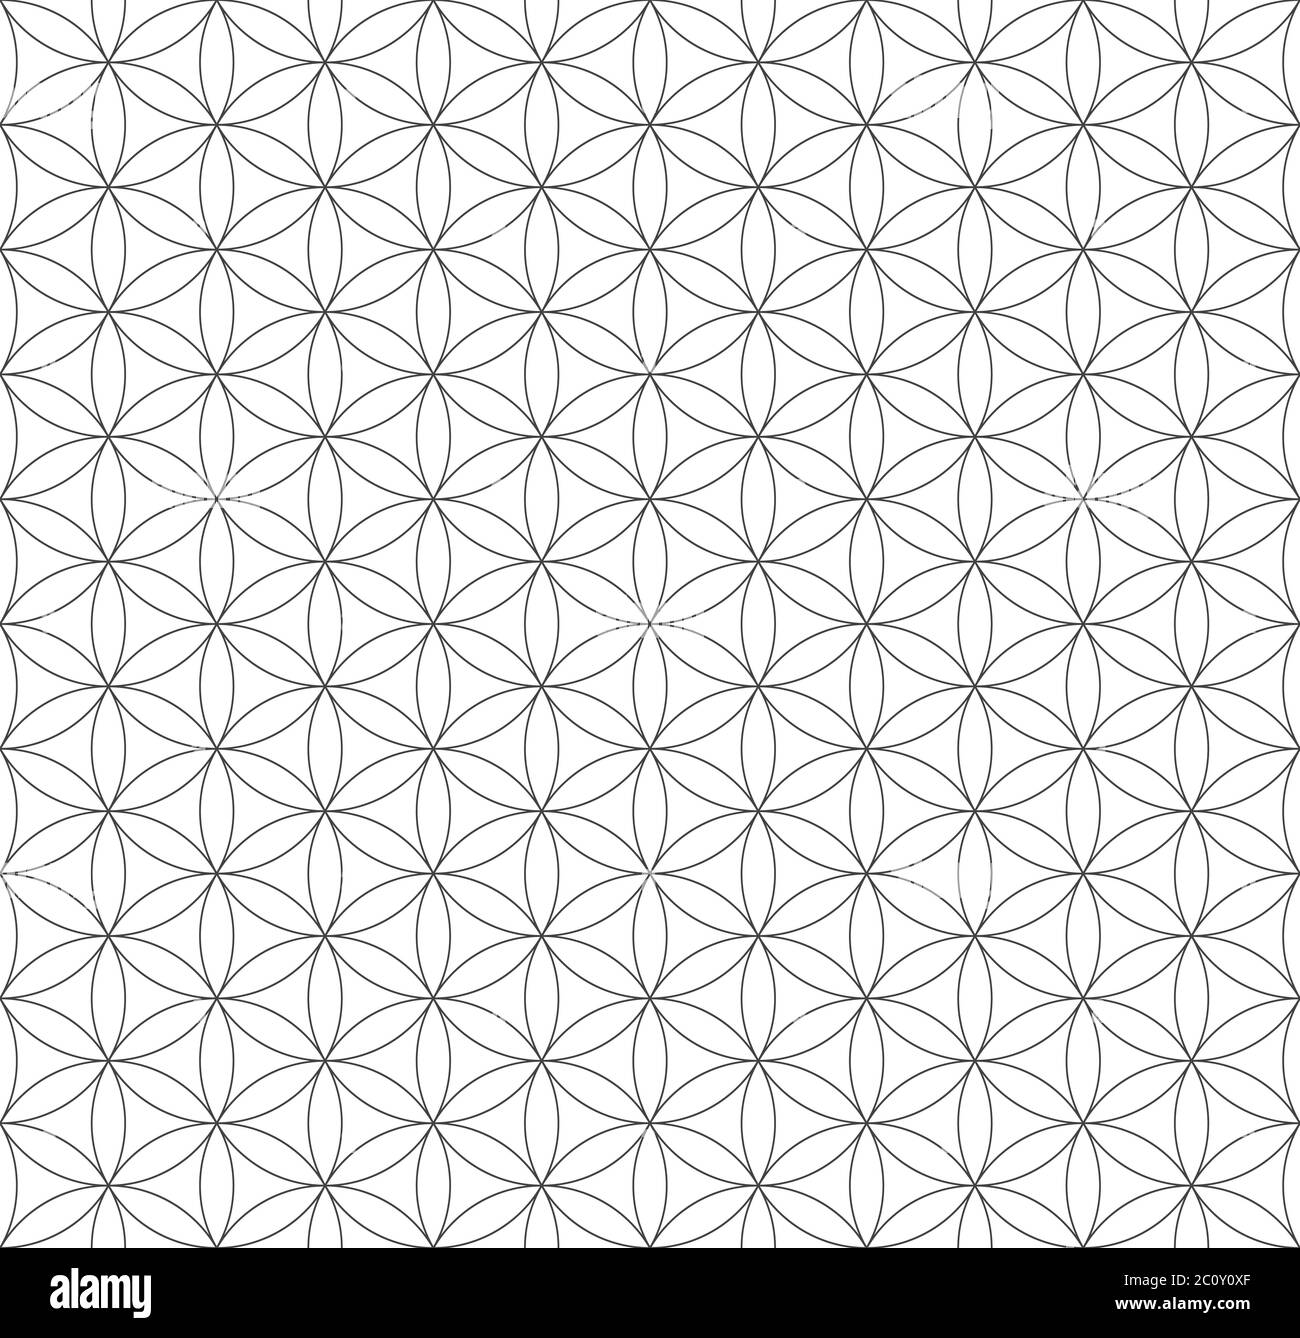 outline flower of life sacred geometry pattern Stock Photo